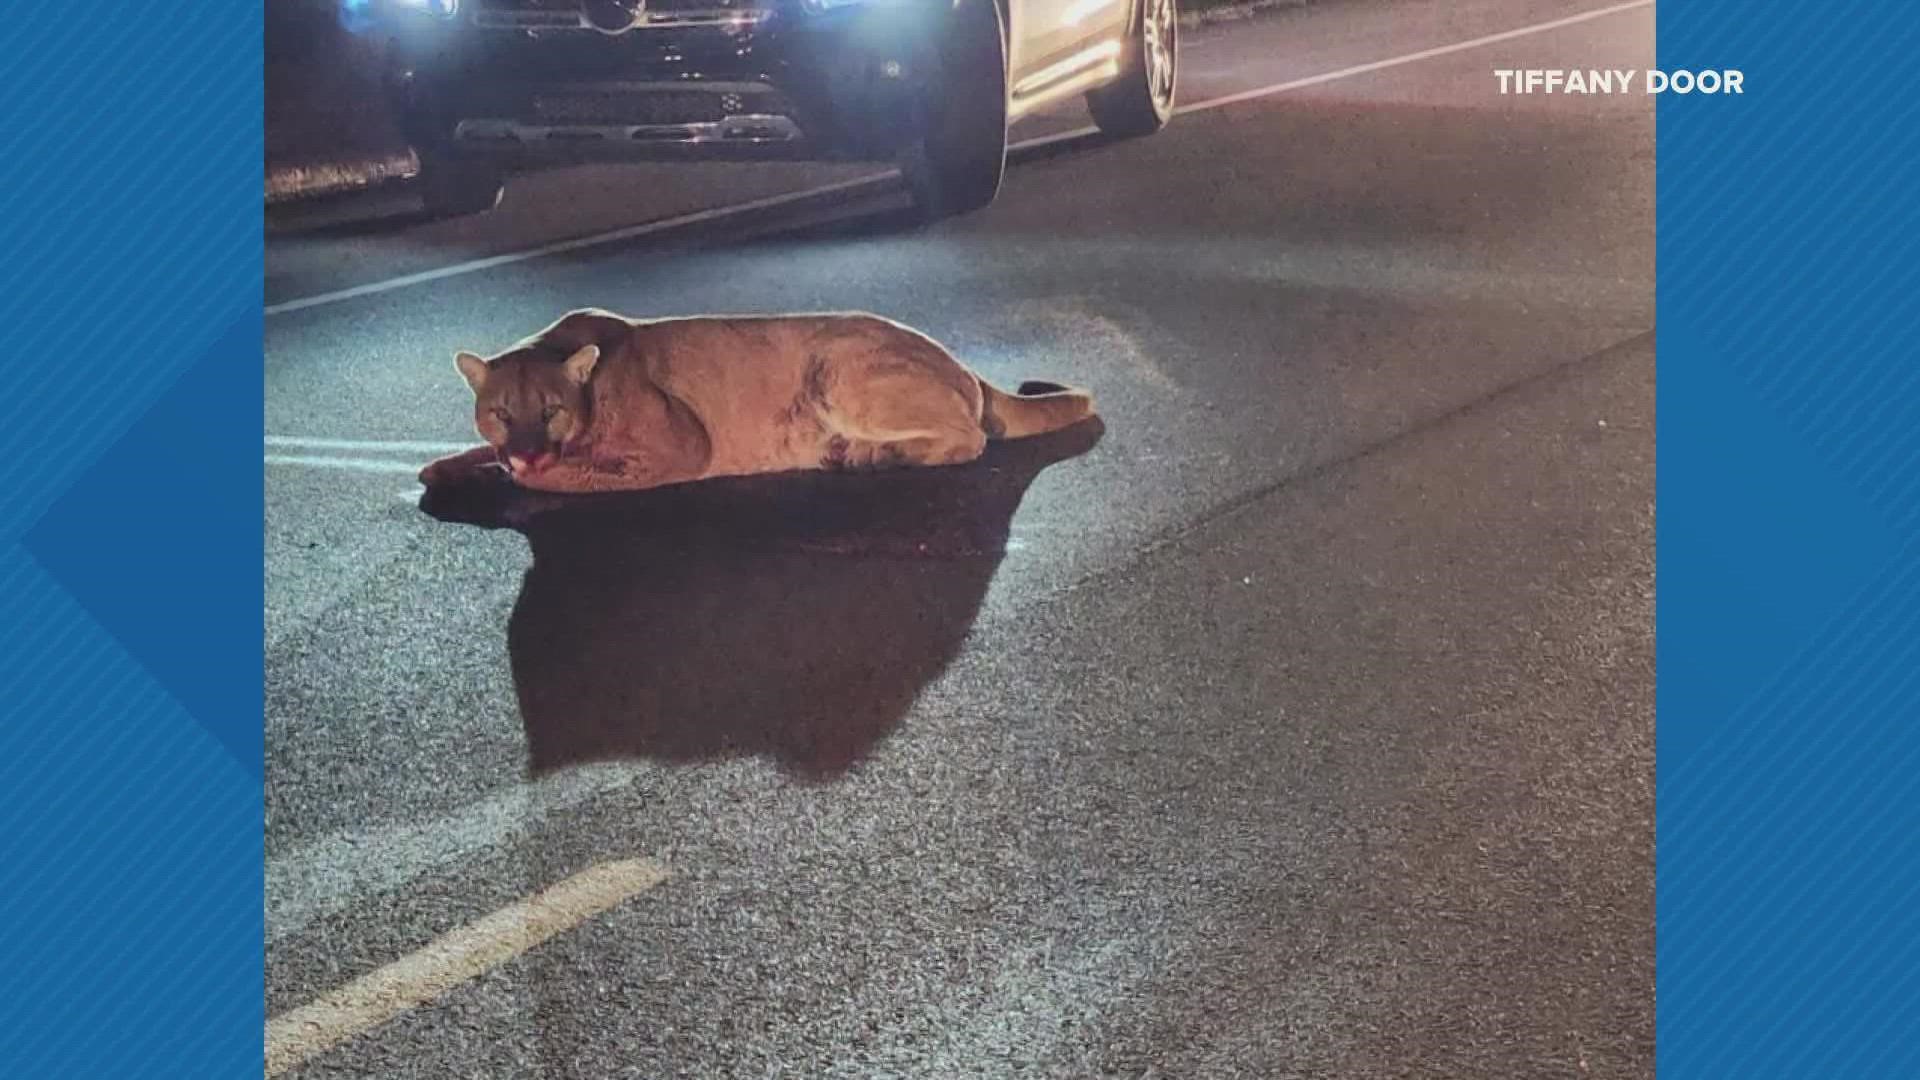 A mountain lion was hit Monday night off Highway 100 in Franklin County. The mountain lion is nowhere to be found at this time.